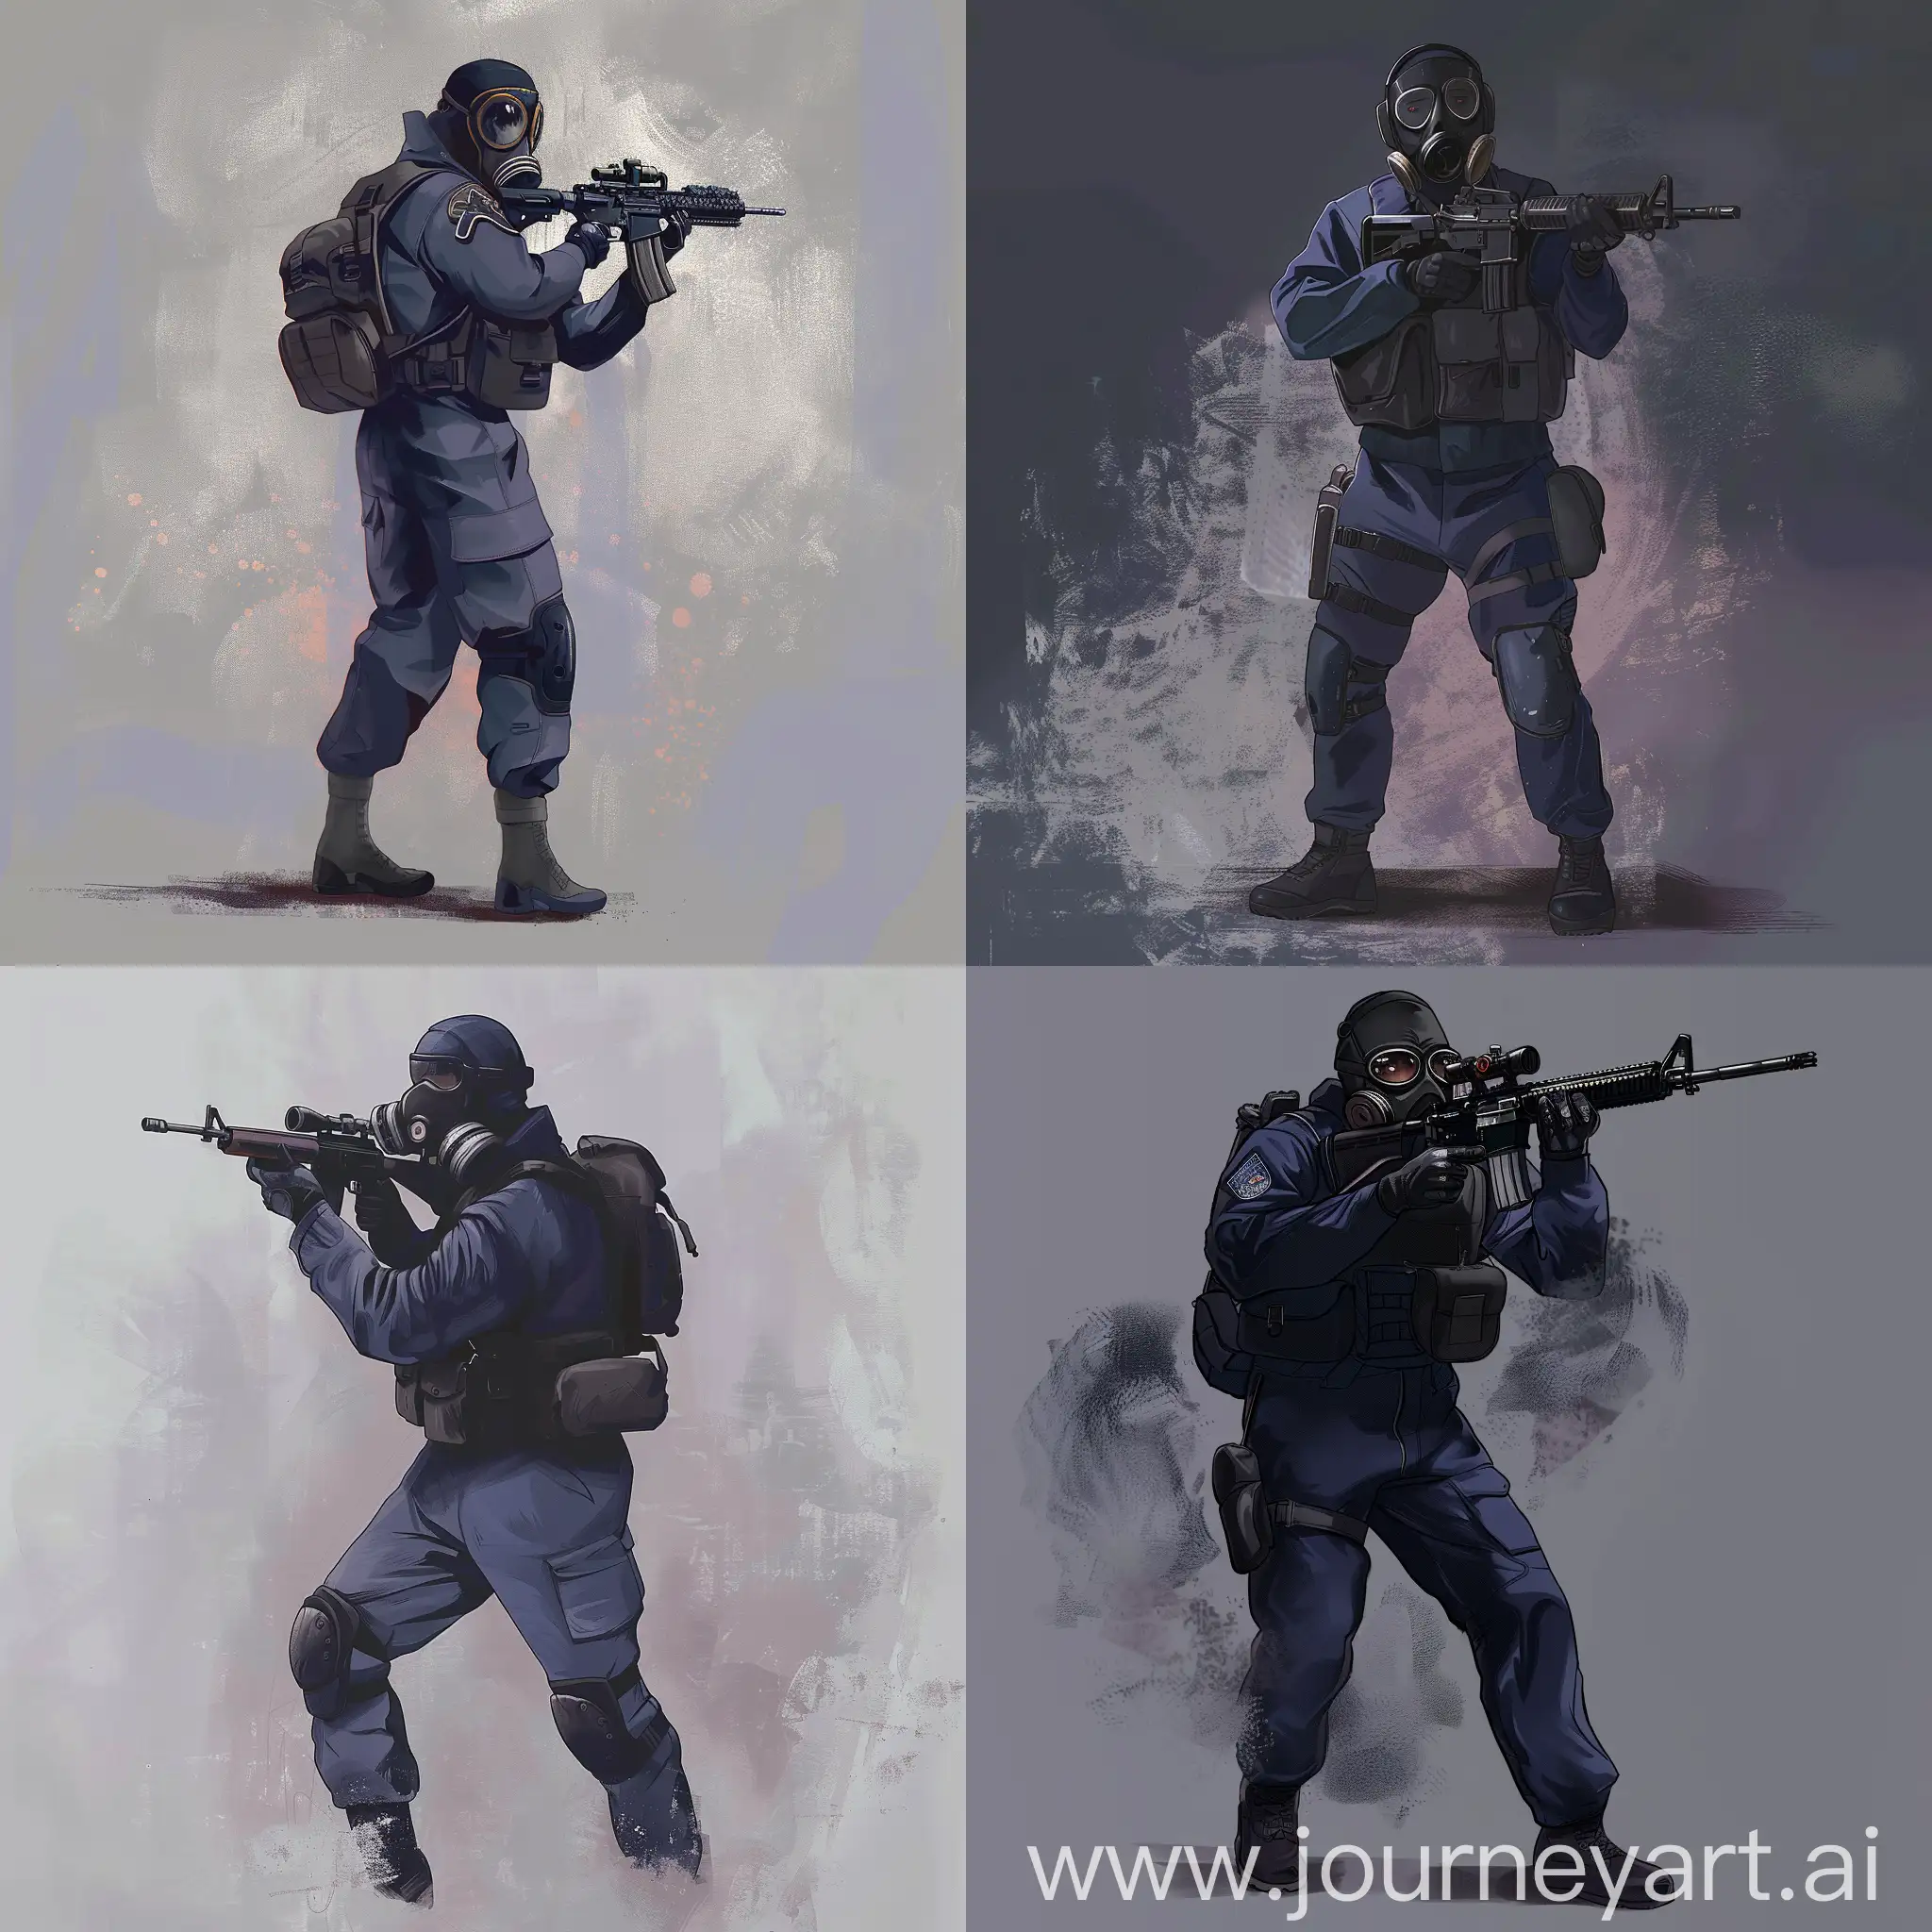 Concept character art, SAS operator, dark purple military jumpsuit, hazmat protective gasmask on his face, small military backpack, military unloading on his body, sniper rifle in his hands.